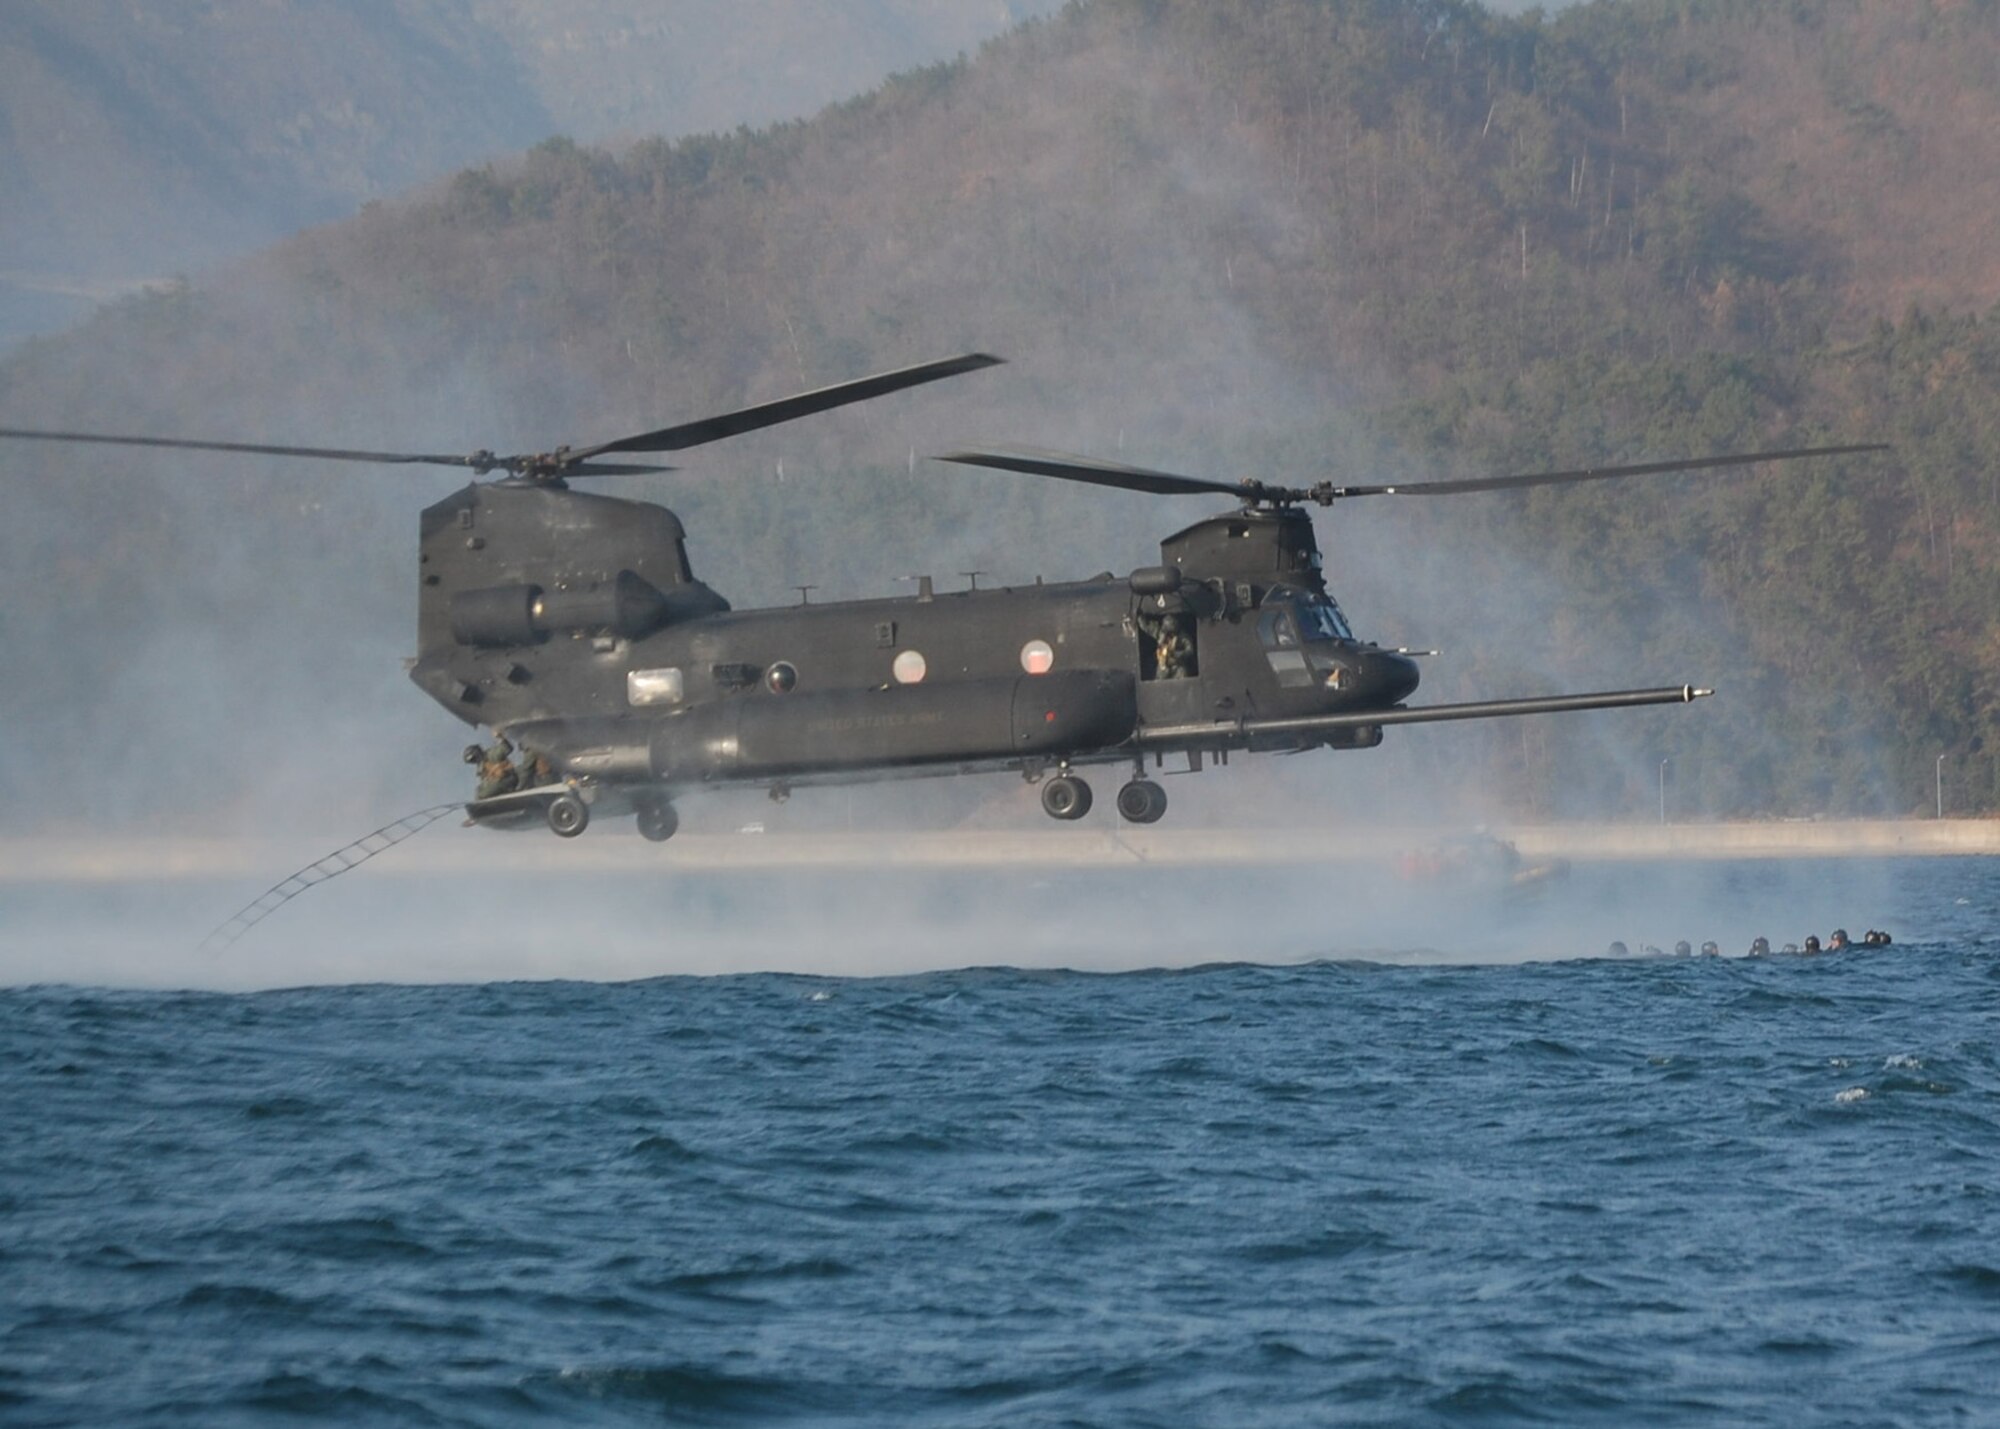 NEAR CHINHAE, Republic of Korea -- Crew members throw a rope ladder out the back of a U.S. Army MH-47 helicopter from the 160th Special Operations Aviation Regiment (Airborne) to retrieve members of the 320th Special Tactics Squadron from the water during an infiltration/exfiltration training mission here March 20 during Foal Eagle 2009.  Foal Eagle is an annual combined training exercise for U.S. and Republic of Korea forces to evaluate and improve their ability to coordinate procedures, plans and systems necessary to defend the ROK. The 320th STS is deployed from Kadena Air Base, Japan, and the 160th SOAR is deployed from Fort Lewis, Wash. (U.S. Air Force photo by James D'Angina)